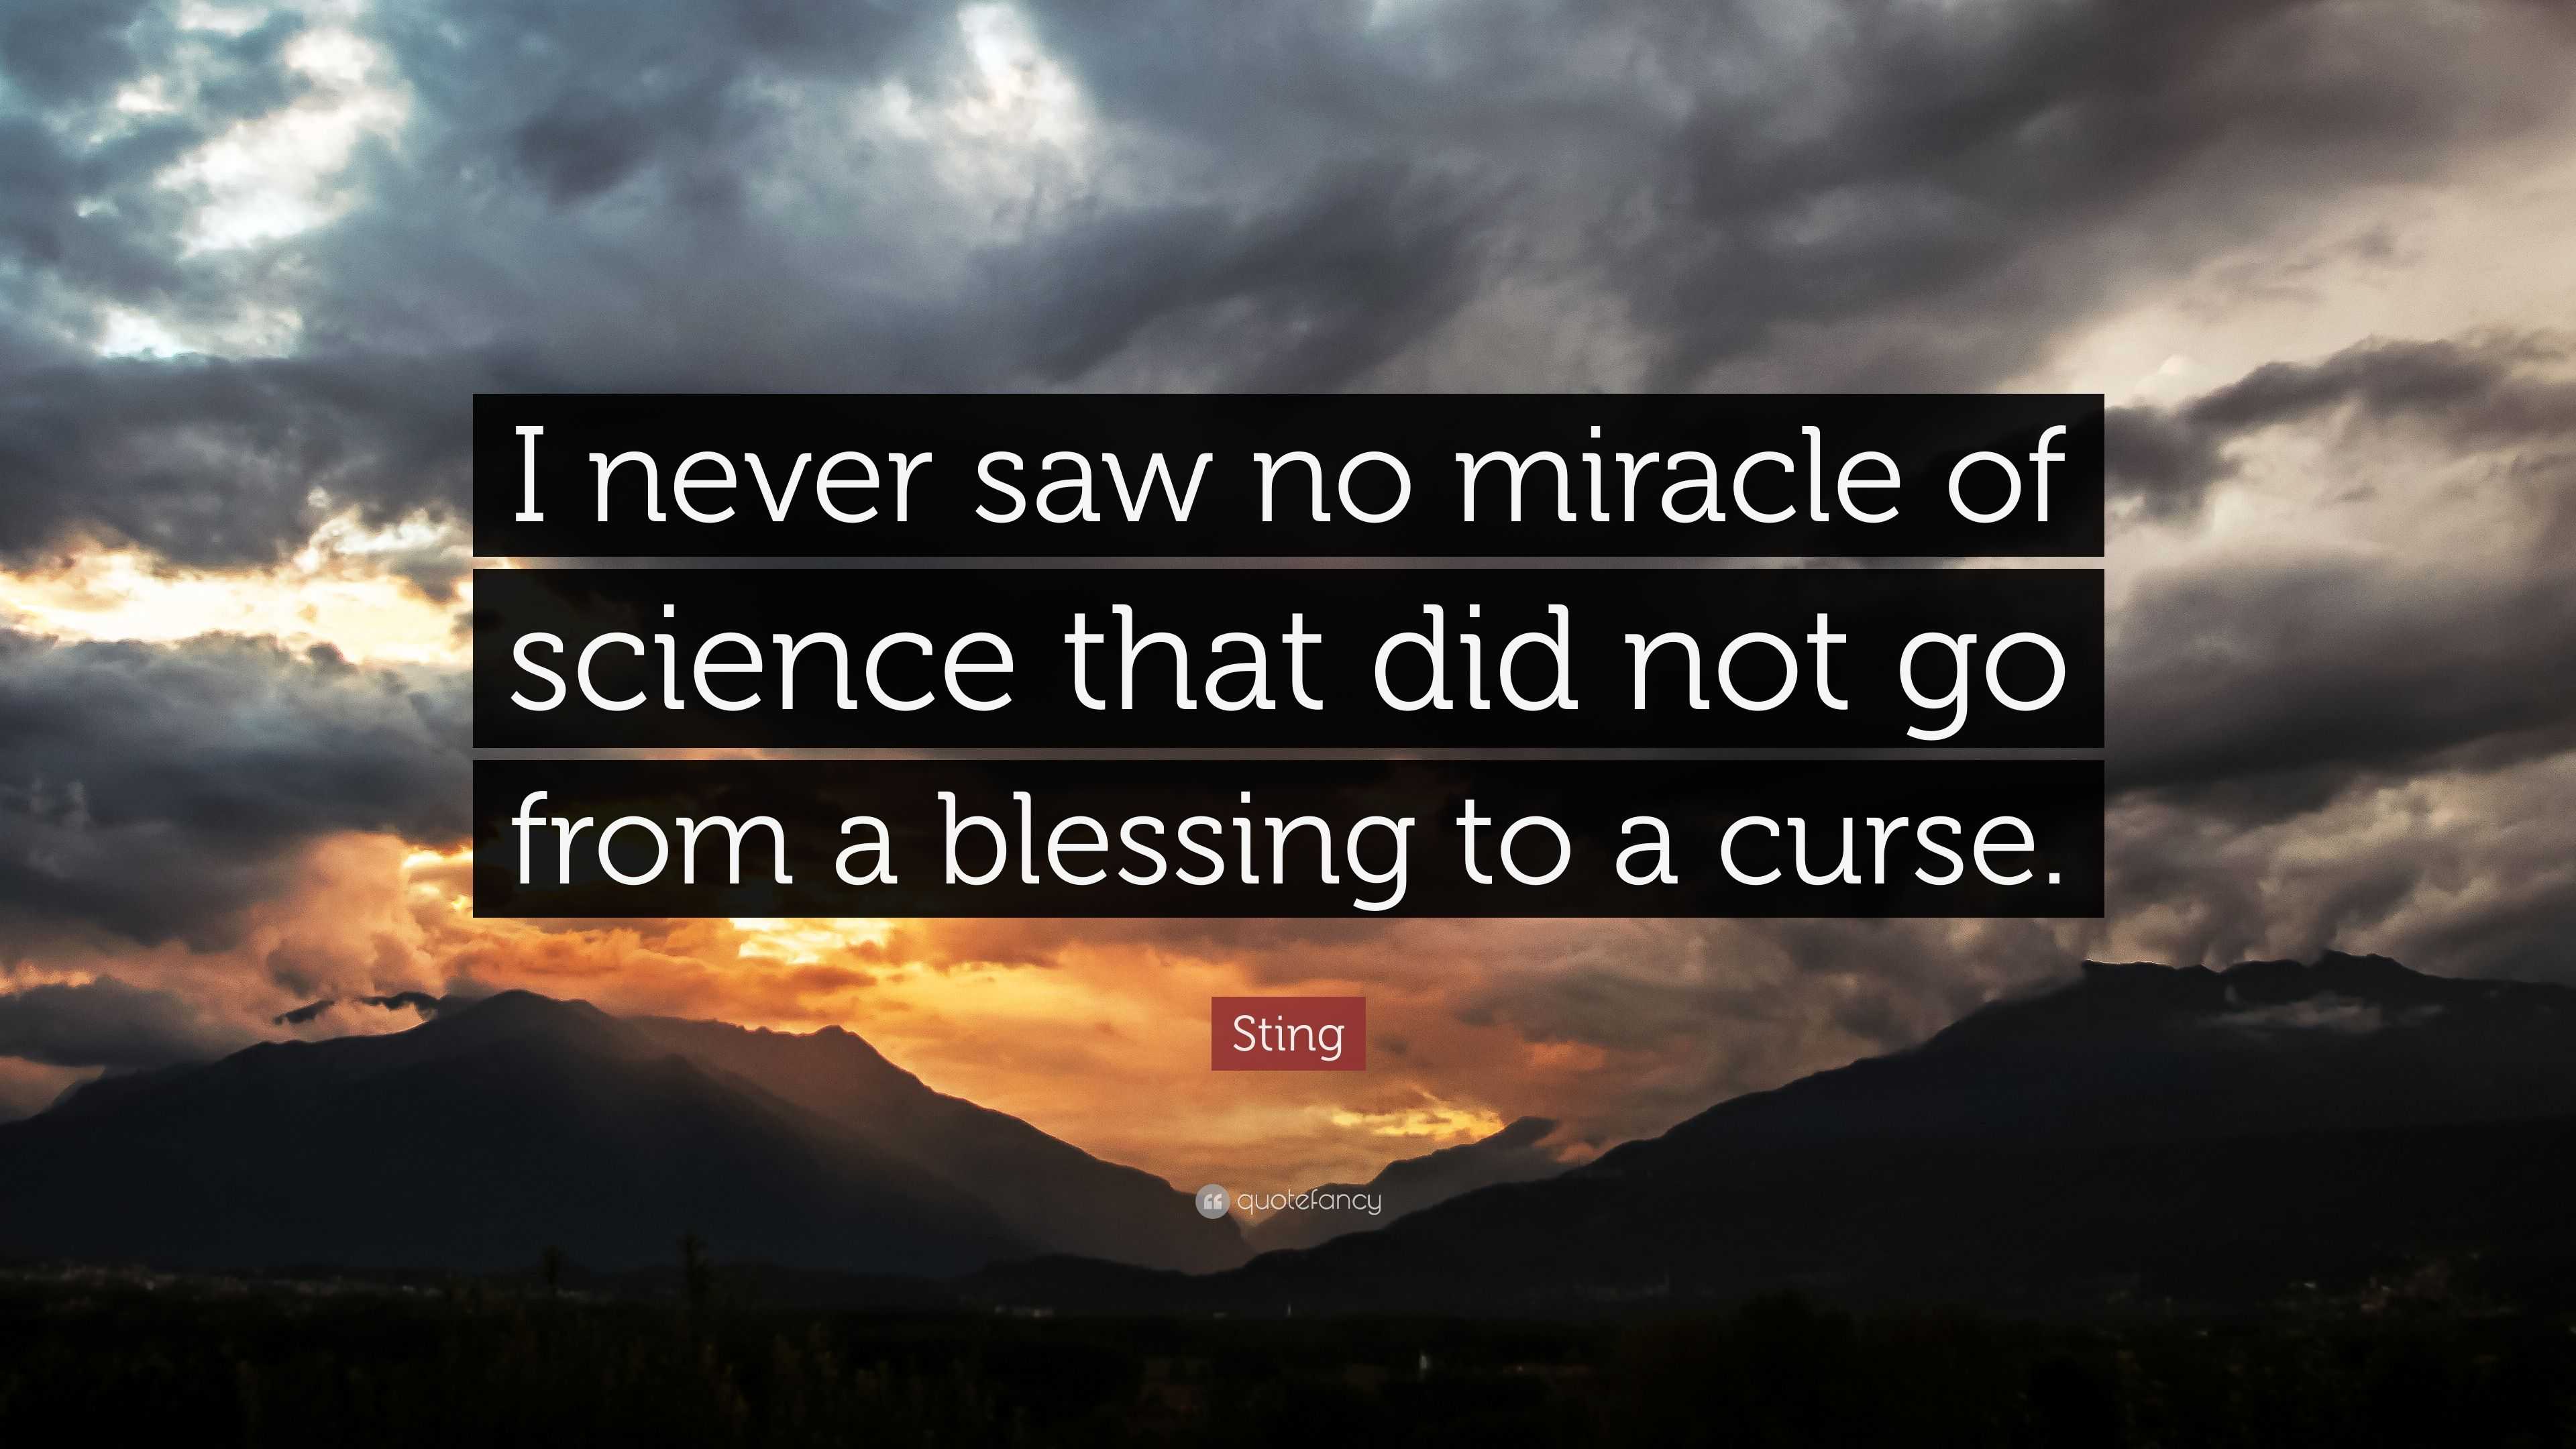 Sting Quote: “I Never Saw No Miracle Of Science That Did Not Go From A Blessing